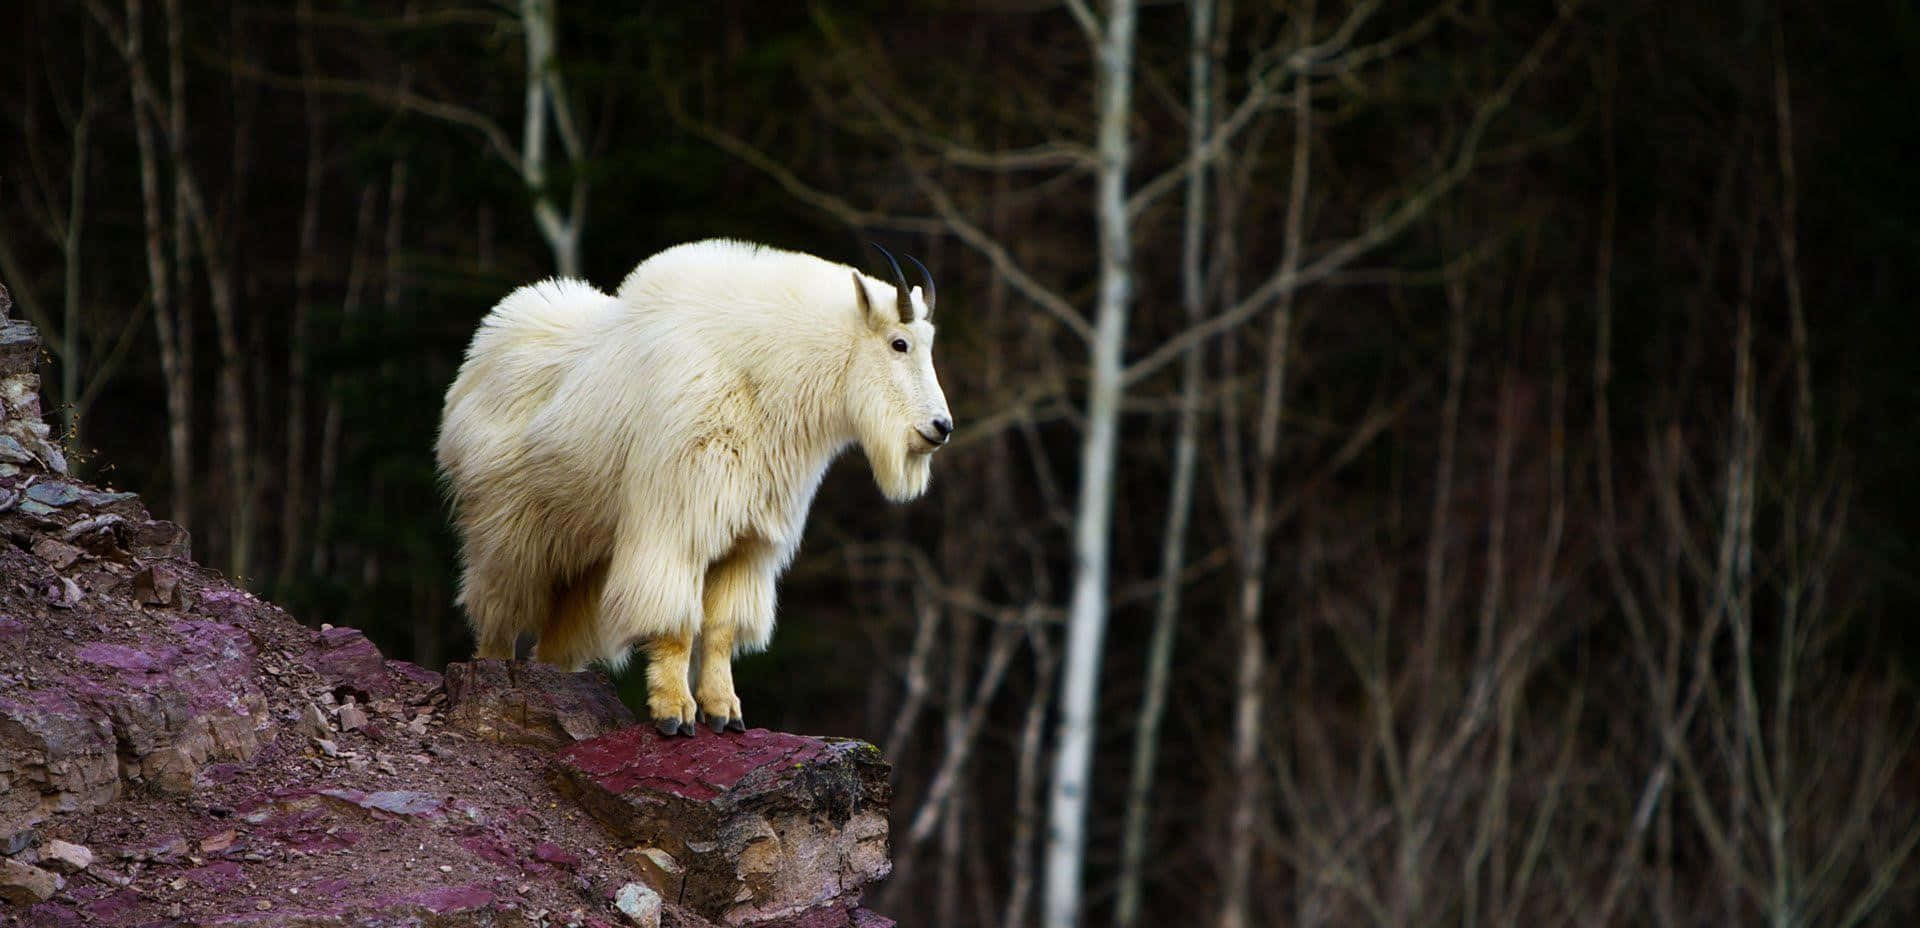 A White Goat Standing On A Rocky Cliff